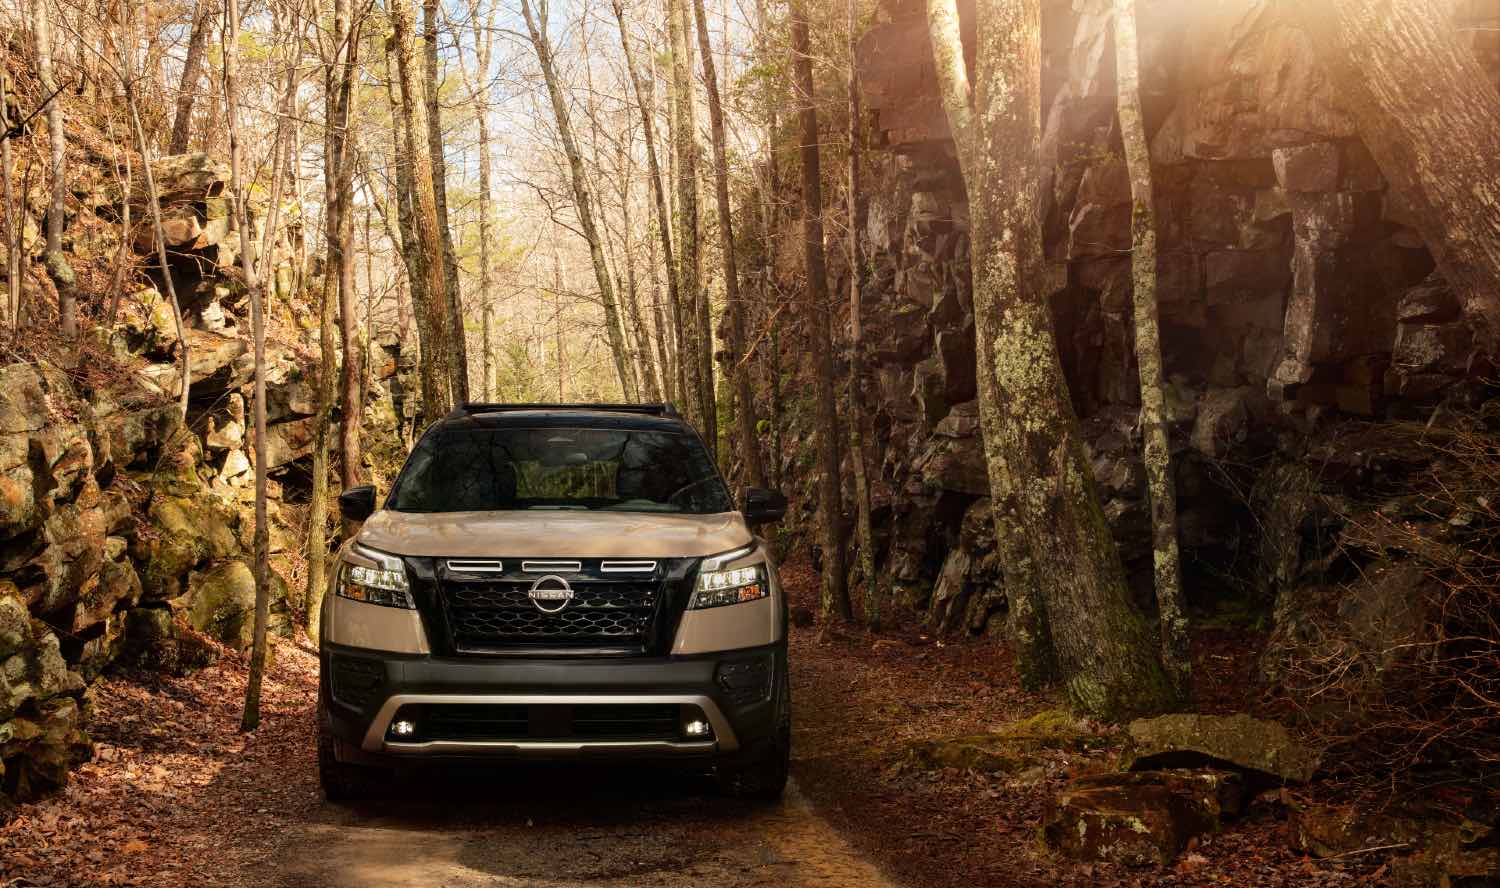 A 2023 Nissan Pathfinder driving in the woods.